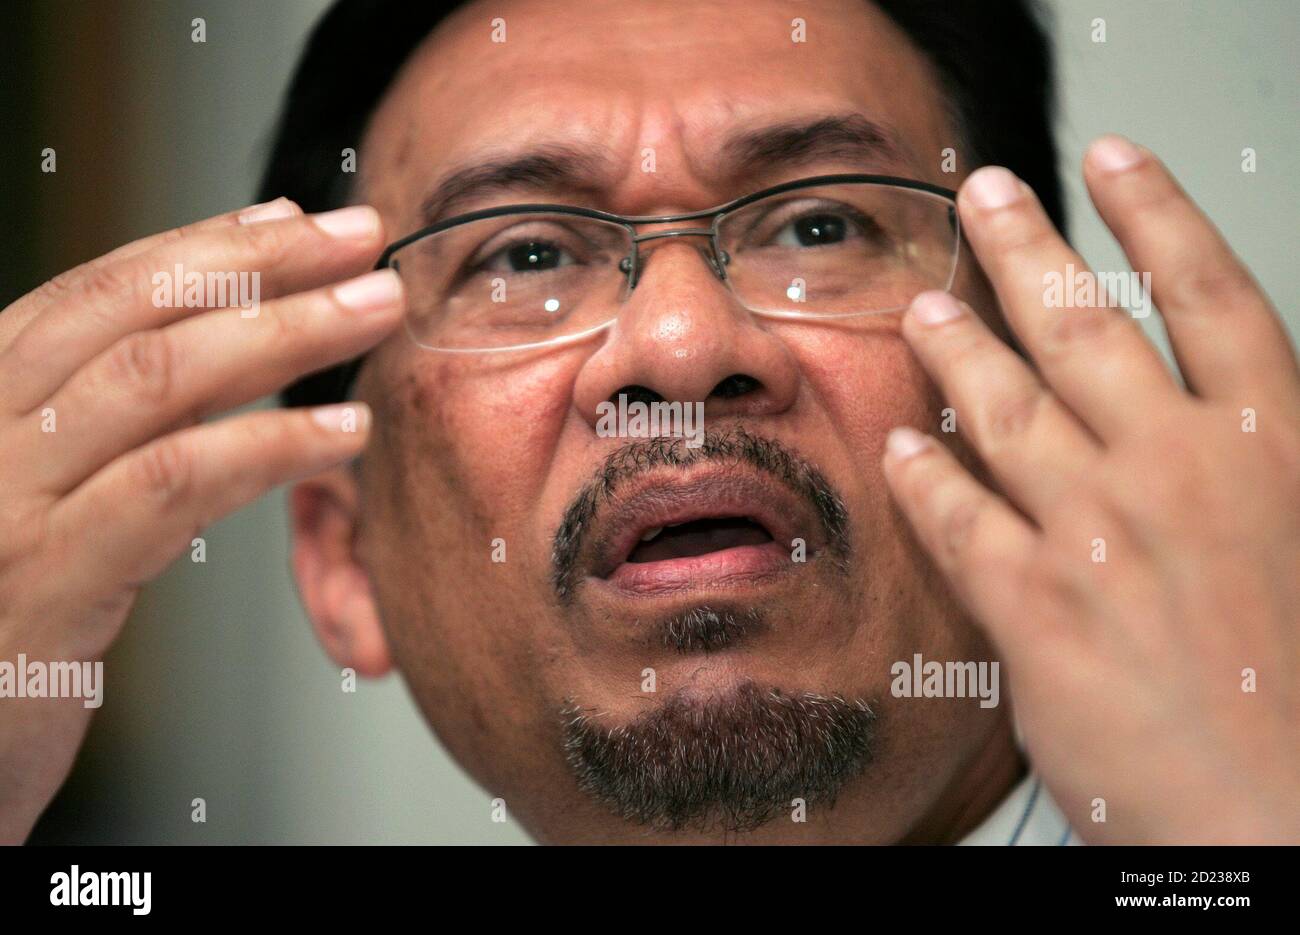 Malaysian opposition figure Anwar Ibrahim gestures during a news conference at his residence in Kuala Lumpur January 10, 2007. Anwar said on Wednesday the police should investigate whether a prominent political analyst used government connections to organise the murder of a Mongolian model.    REUTERS/Zainal Abd Halim (MALAYSIA) Stock Photo